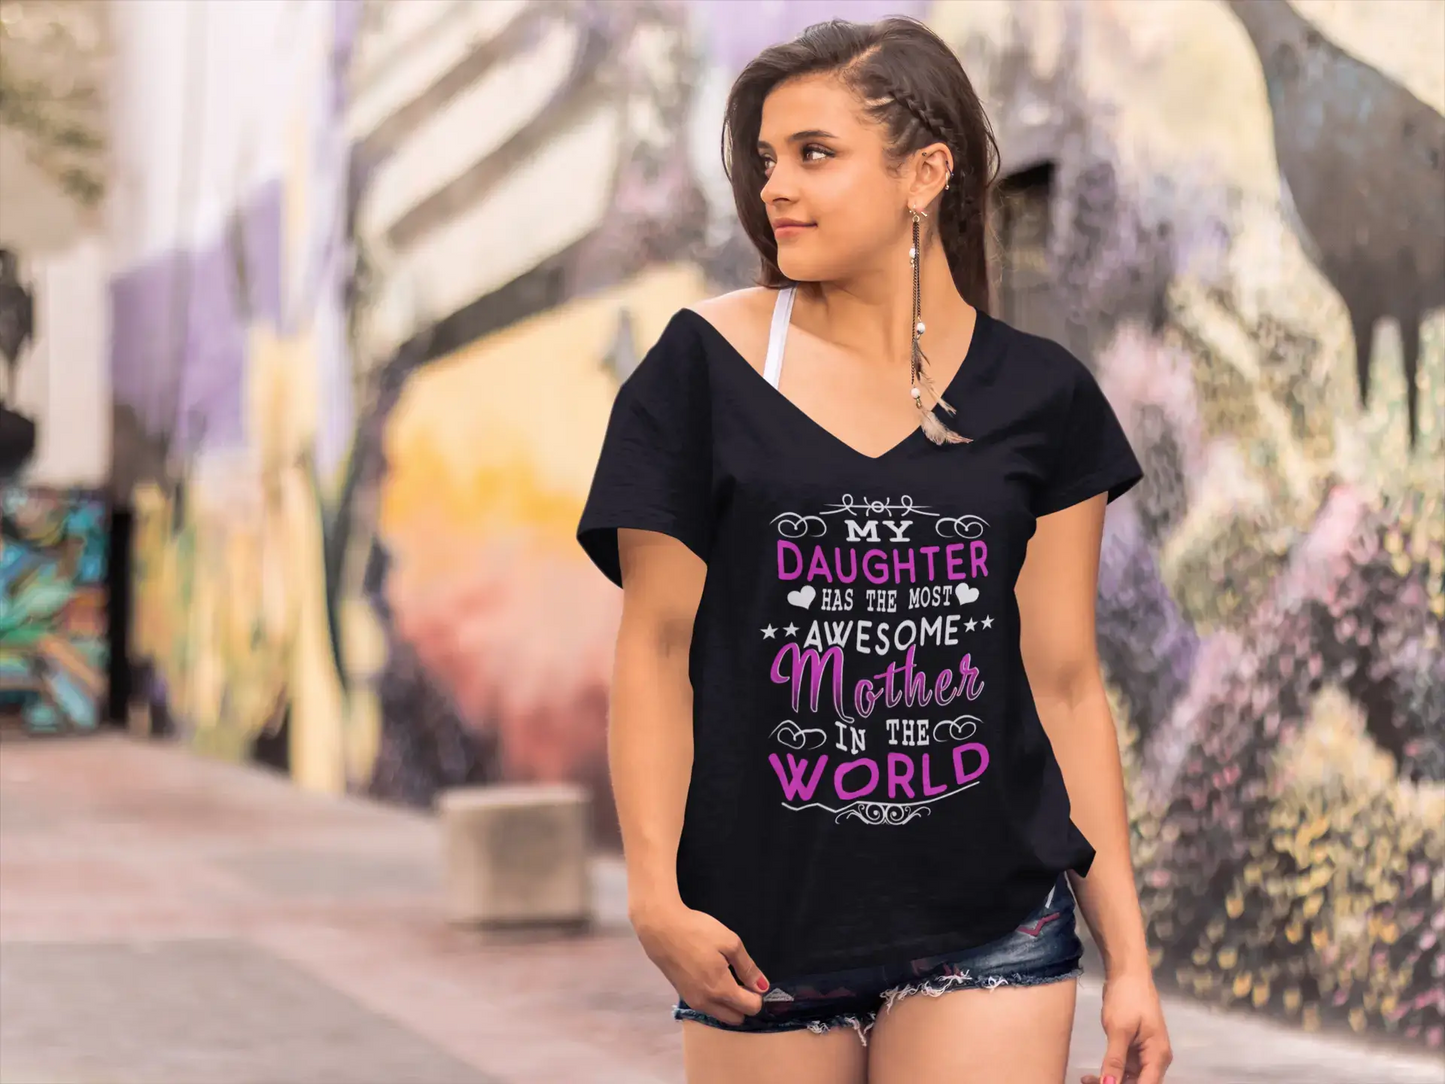 ULTRABASIC Damen-T-Shirt „My Daughter has the Most Awesome Mother in the World“ – Kurzarm-T-Shirt-Oberteile